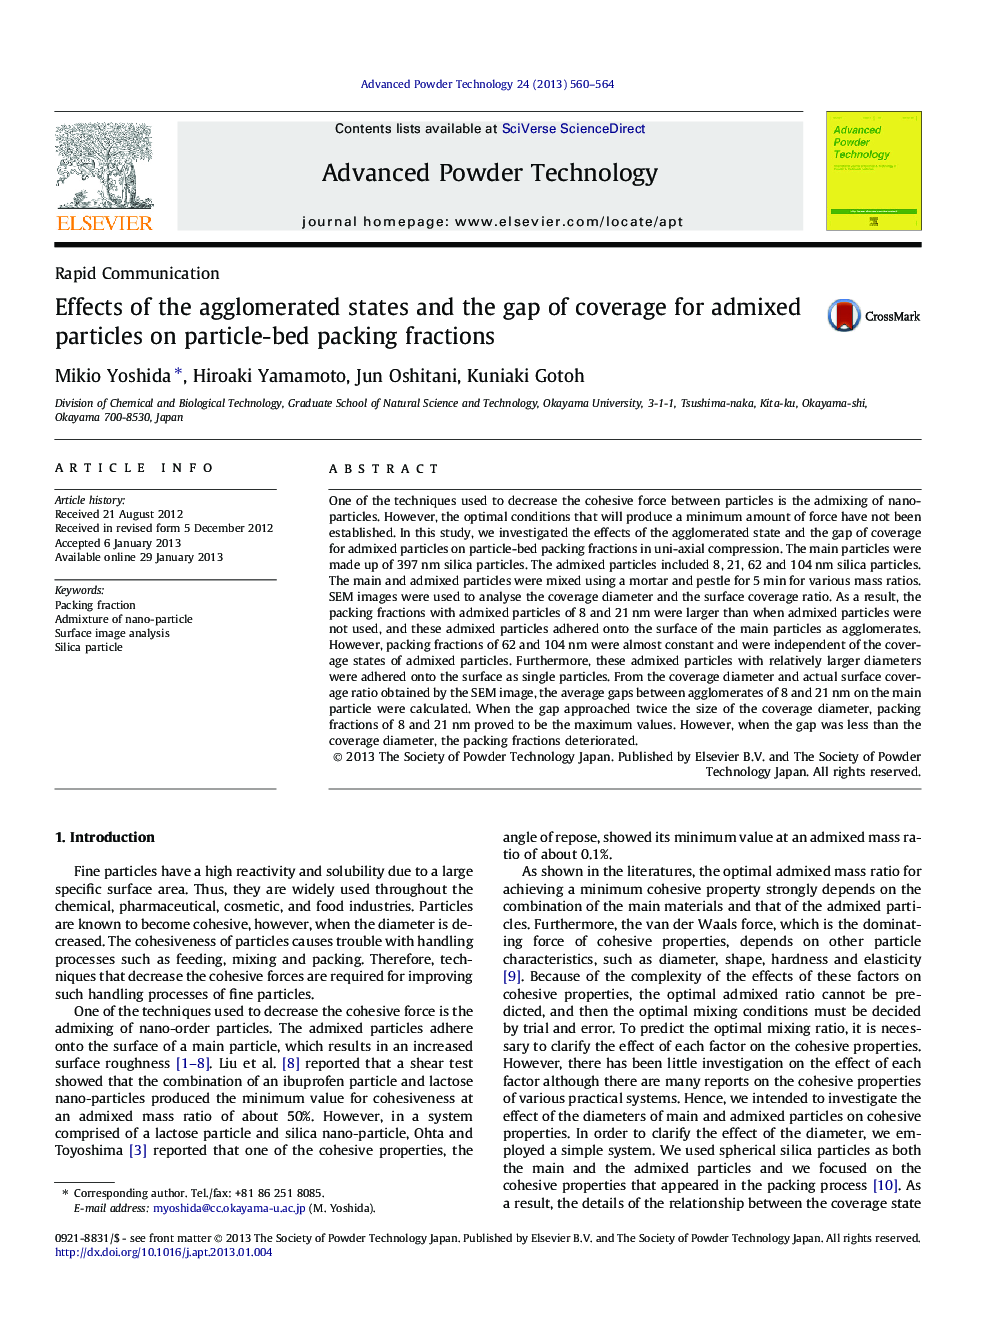 Effects of the agglomerated states and the gap of coverage for admixed particles on particle-bed packing fractions